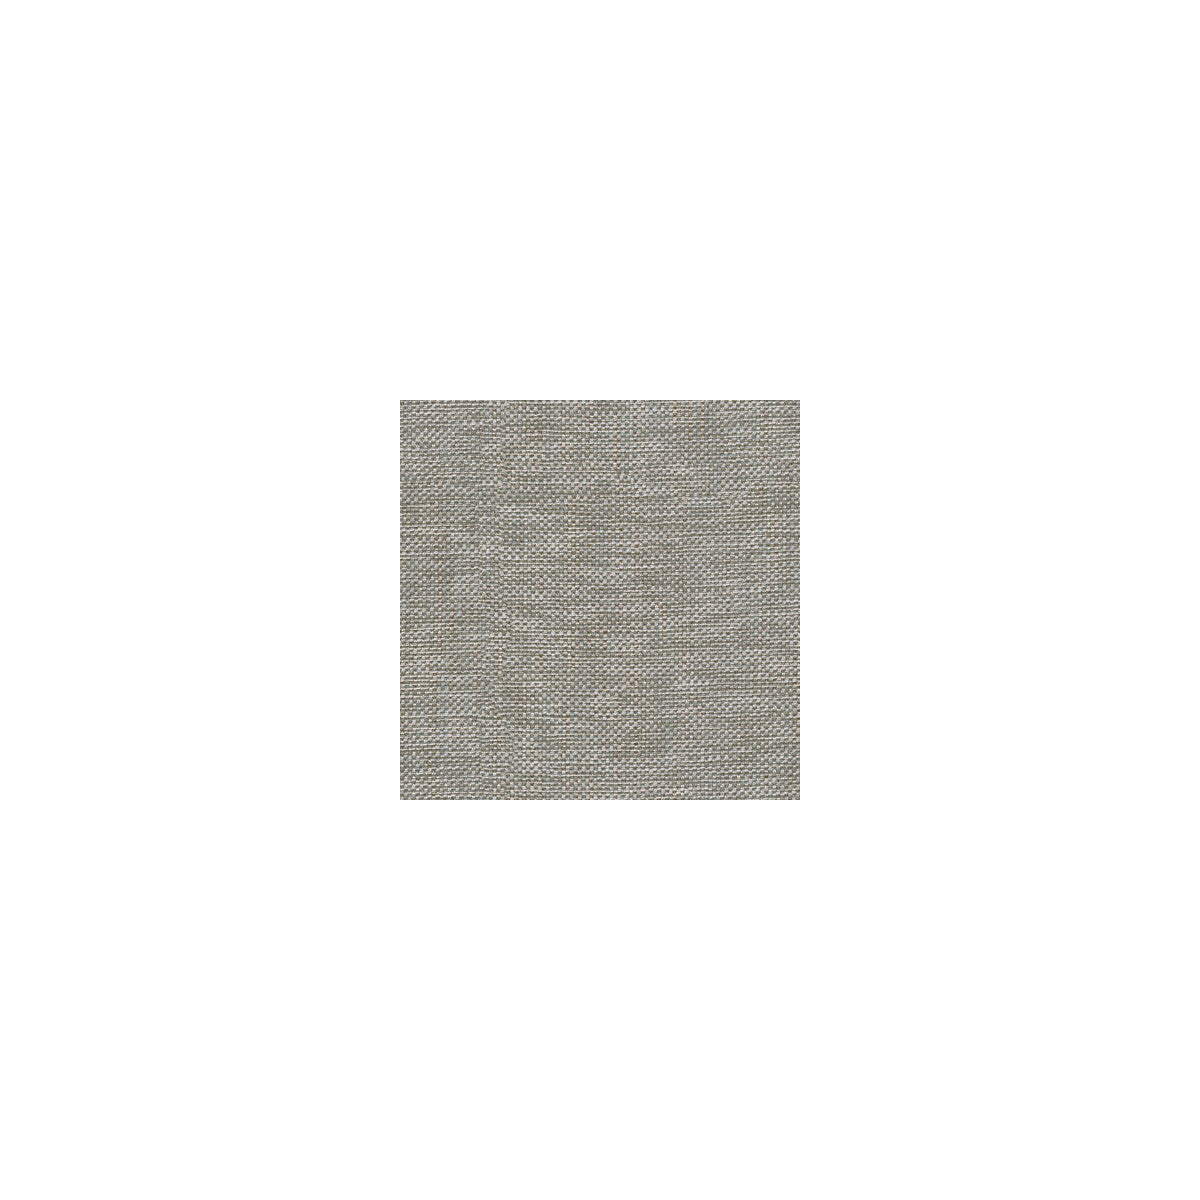 Kravet Basics fabric in 30299-11 color - pattern 30299.11.0 - by Kravet Basics in the Perfect Plains collection